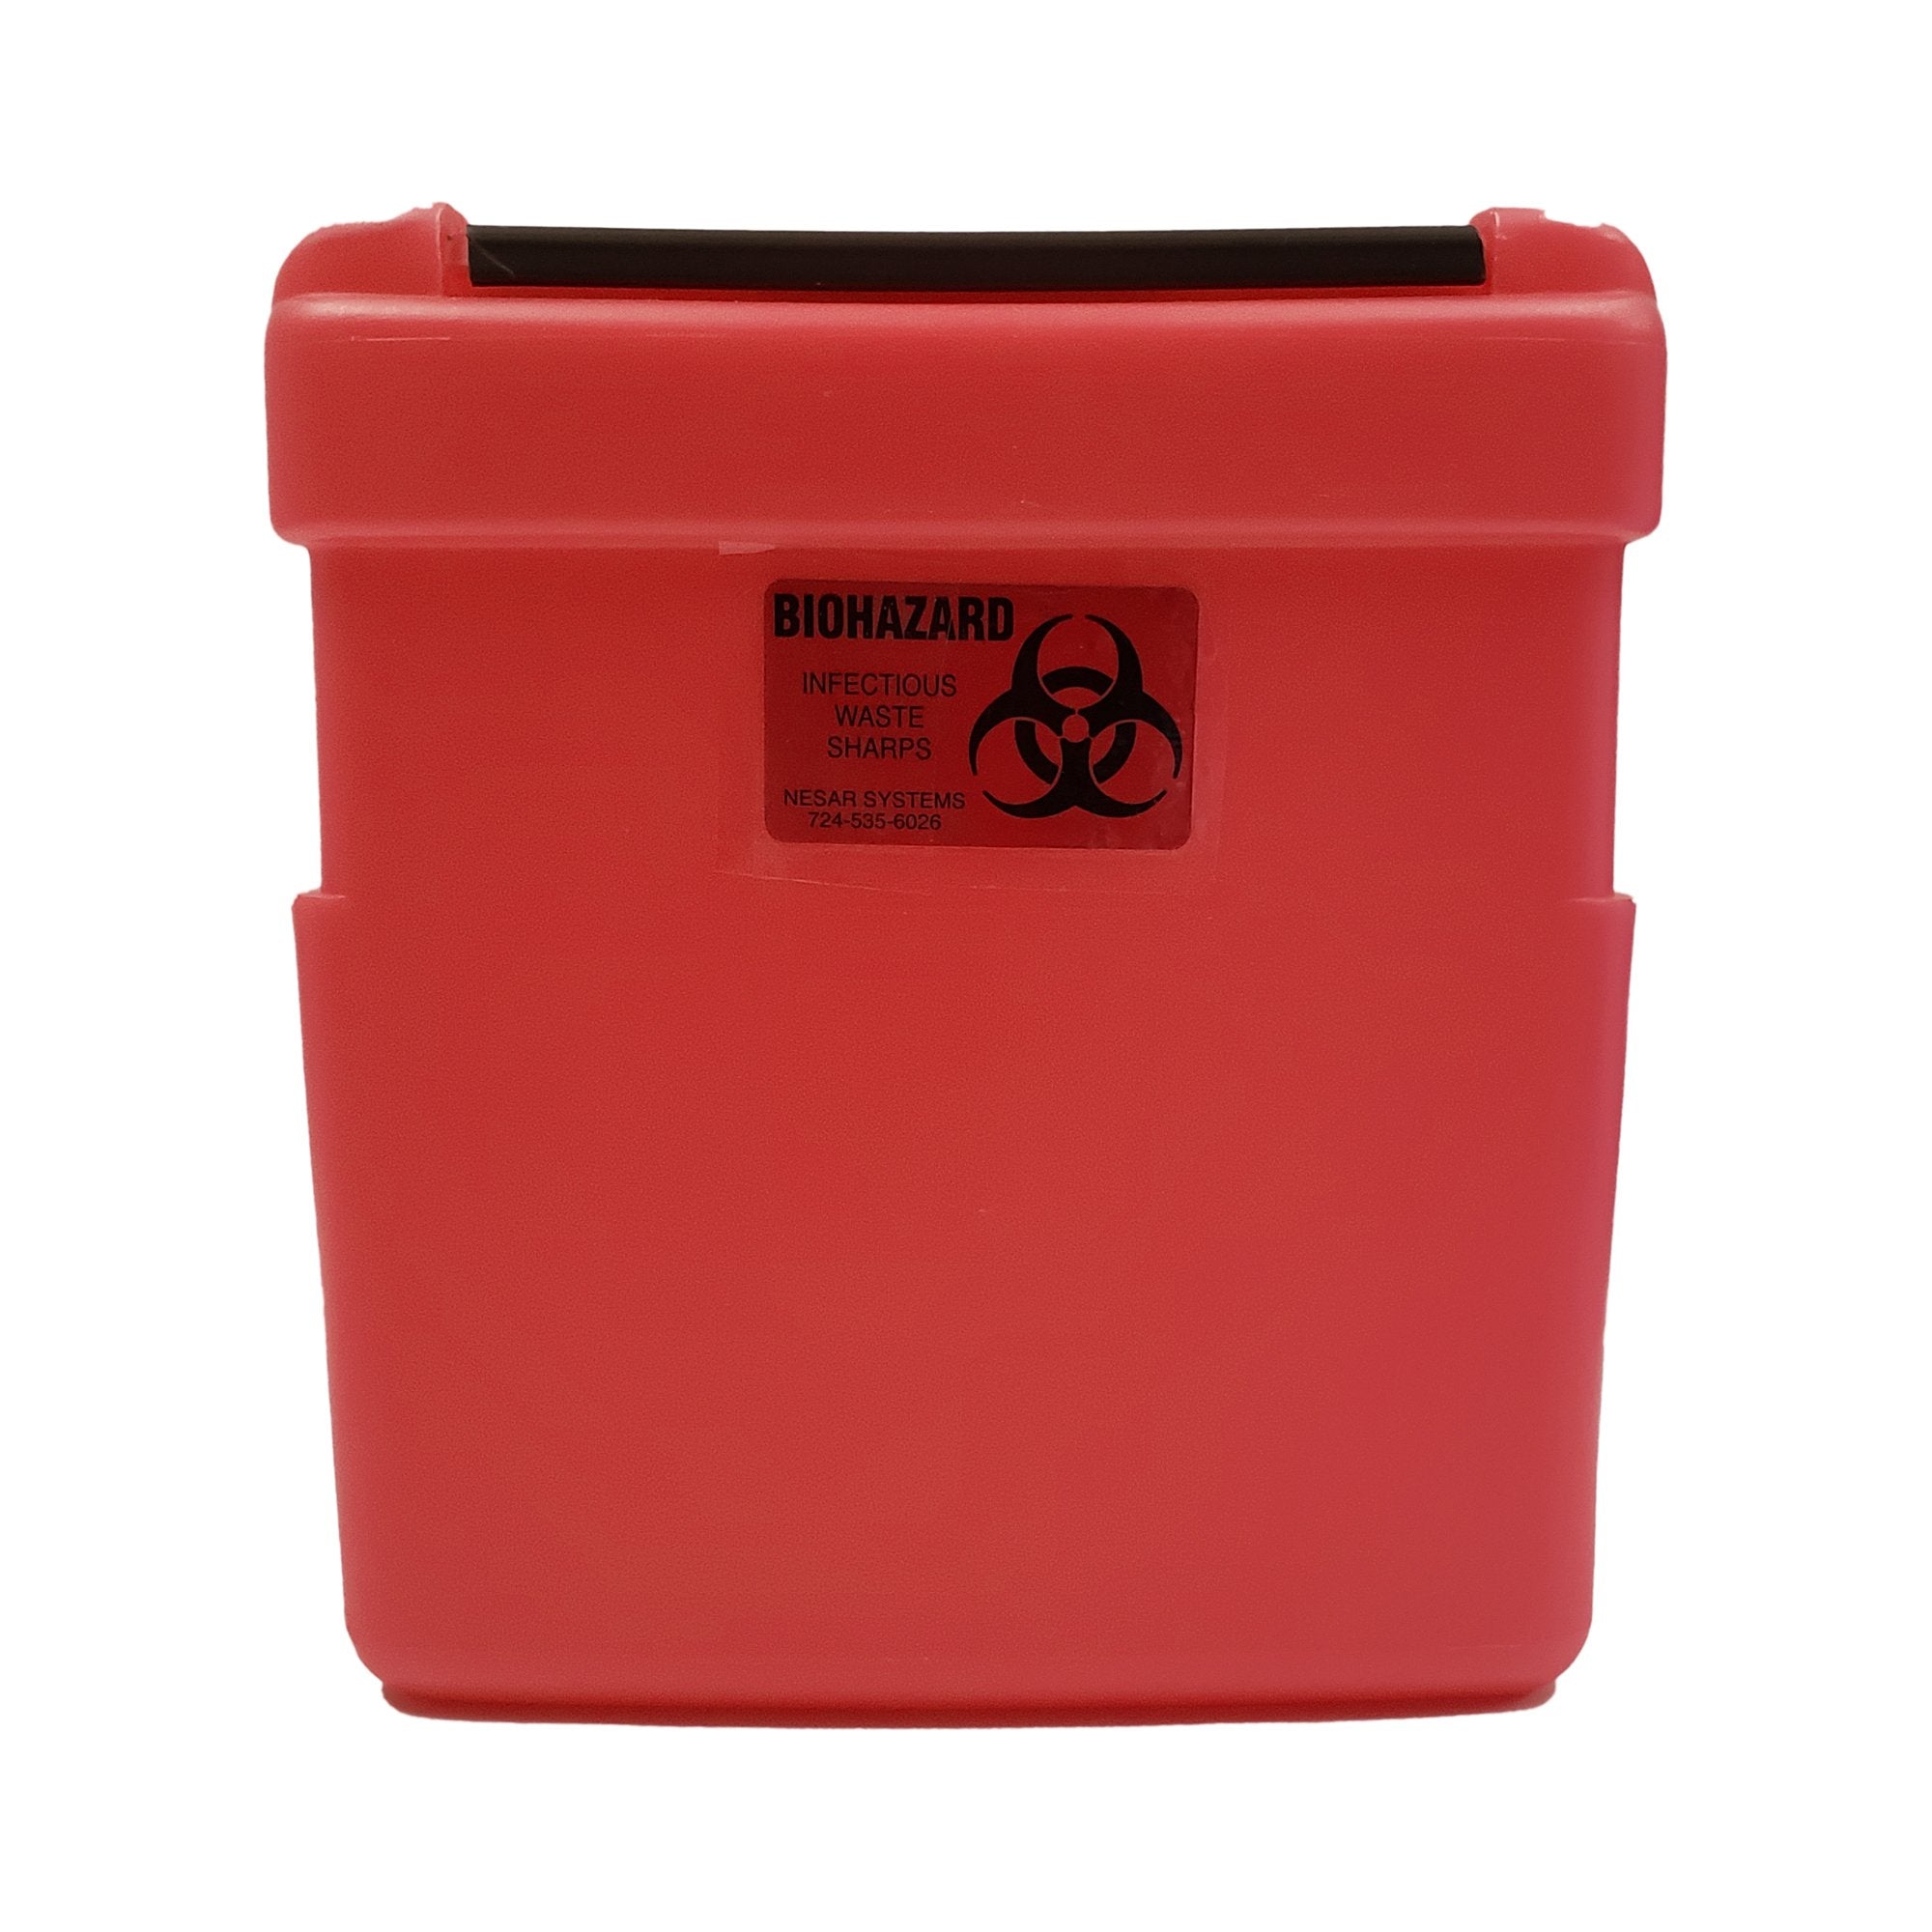 Replacement Radioactive Sharps Container Nesar Systems Red Base 8-1/2 L X 4 D X 9 H Inch Horizontal Entry 1 Gallon